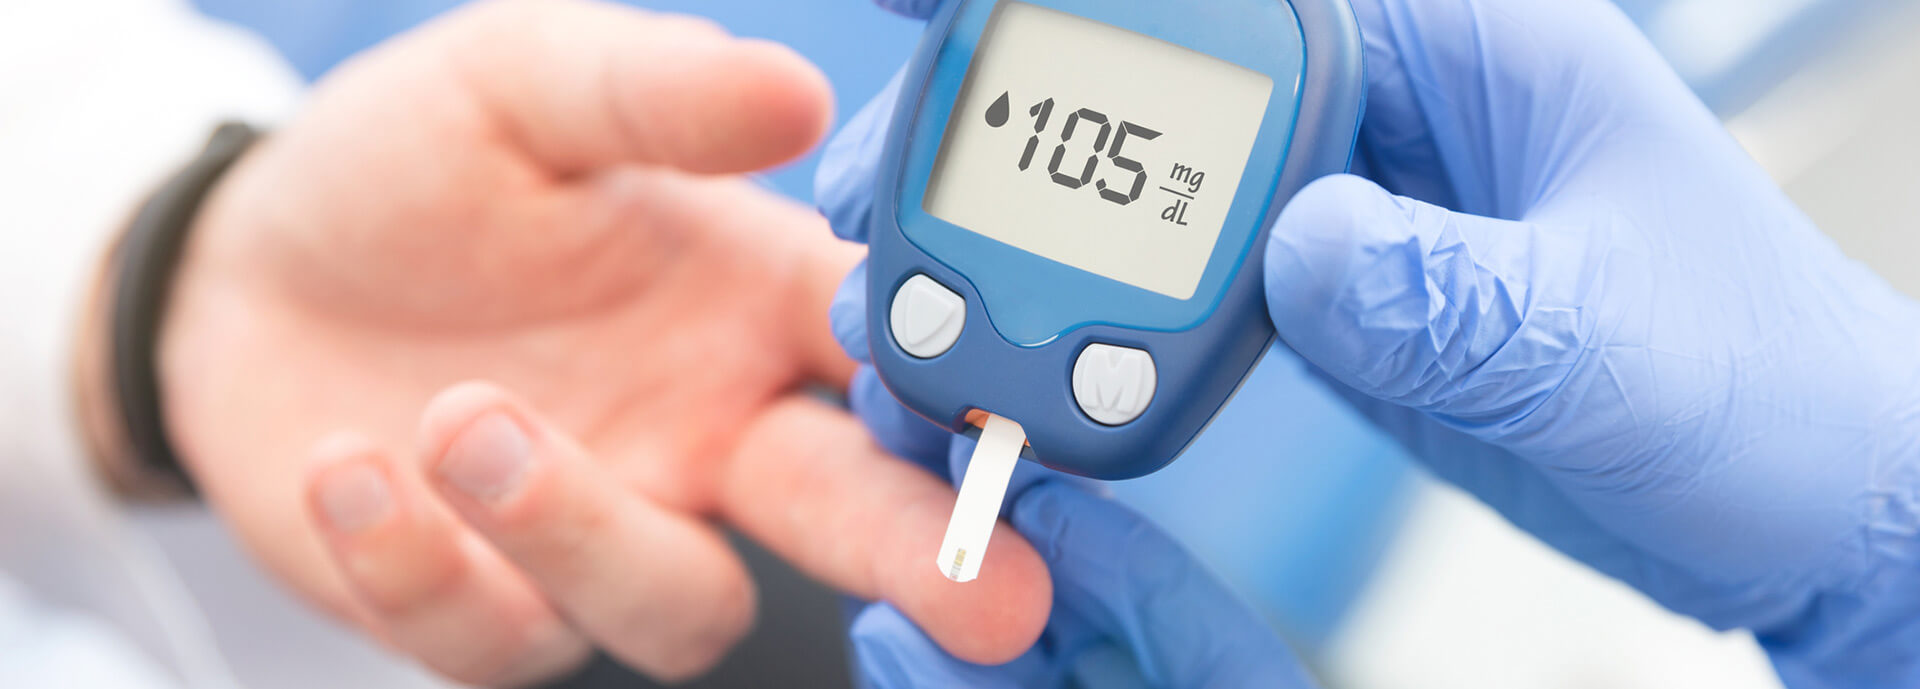 Diabetes test being done on a finger